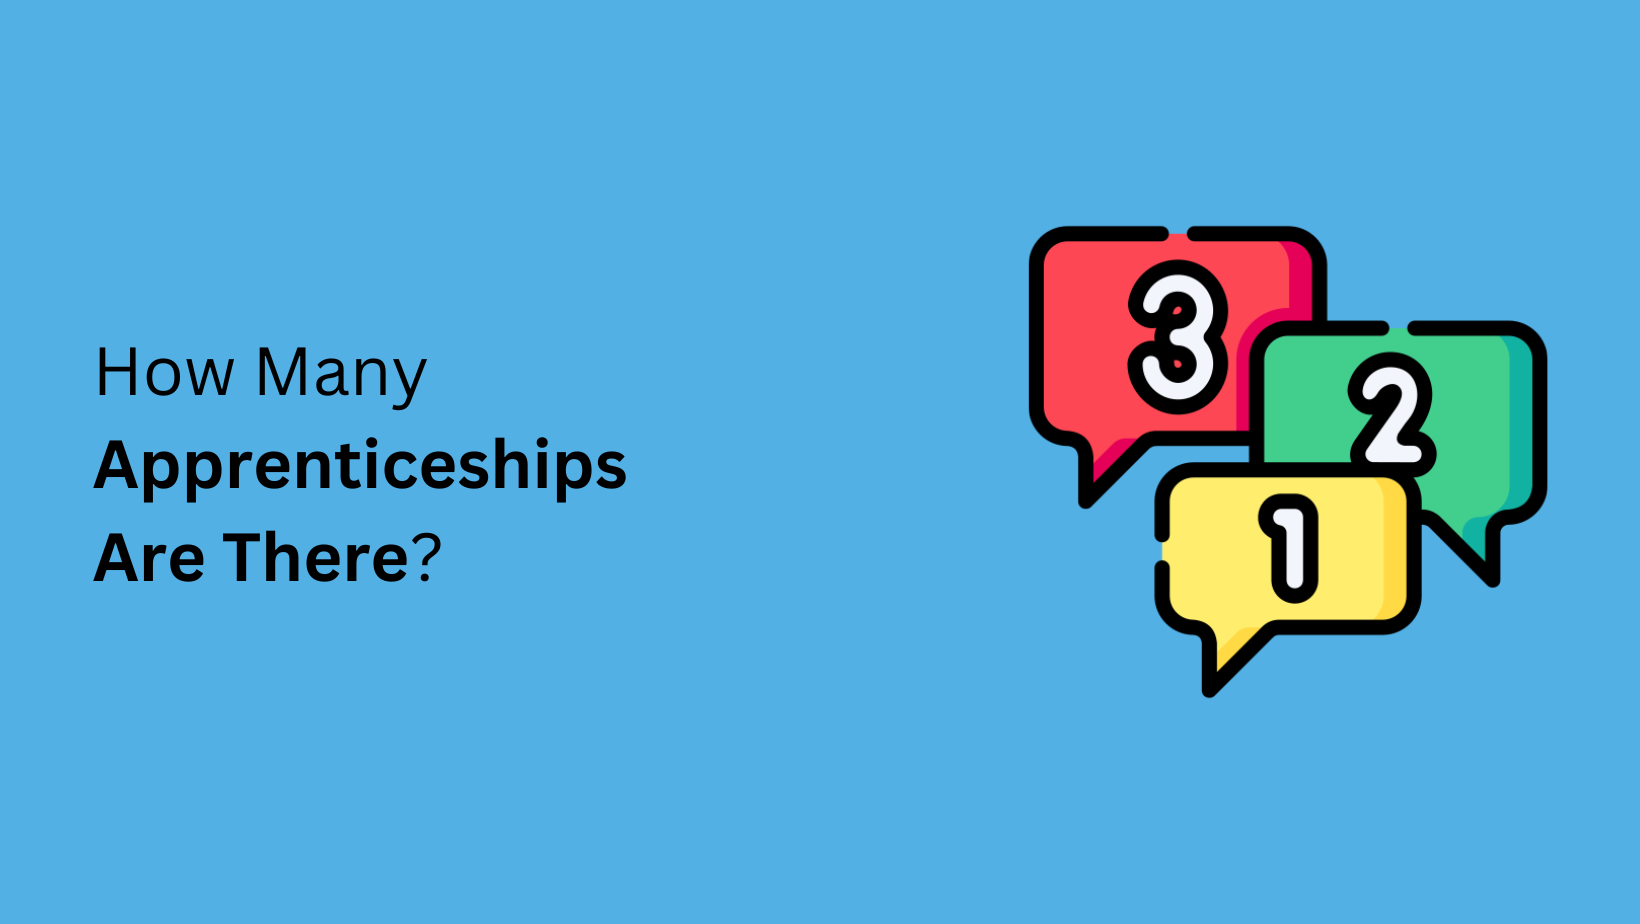 How Many Apprenticeships Are There